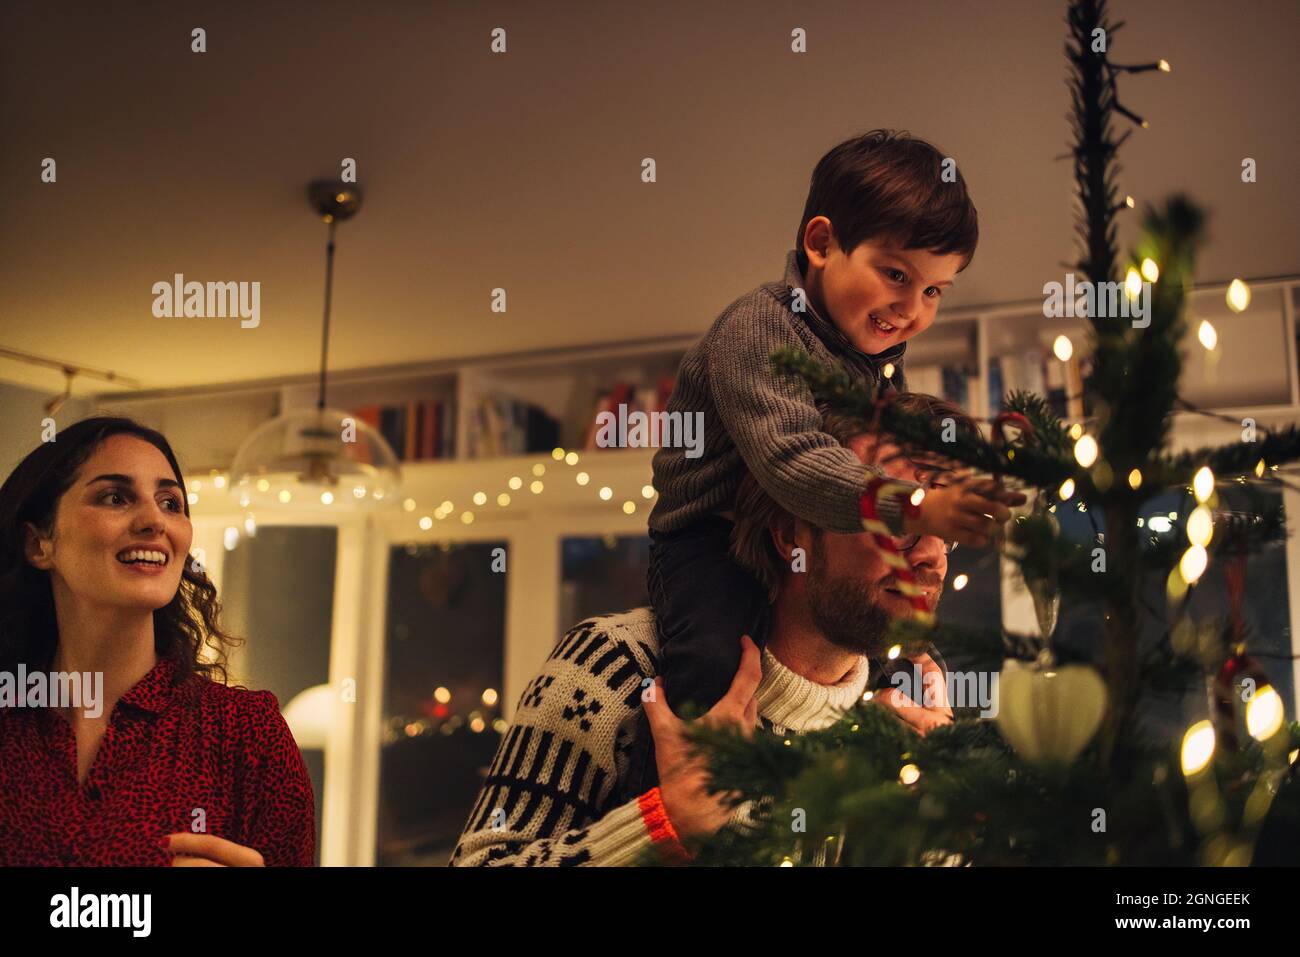 Boy sitting on his father's shoulder while decorating Christmas tree. Family decorating Christmas tree together at home. Stock Photo